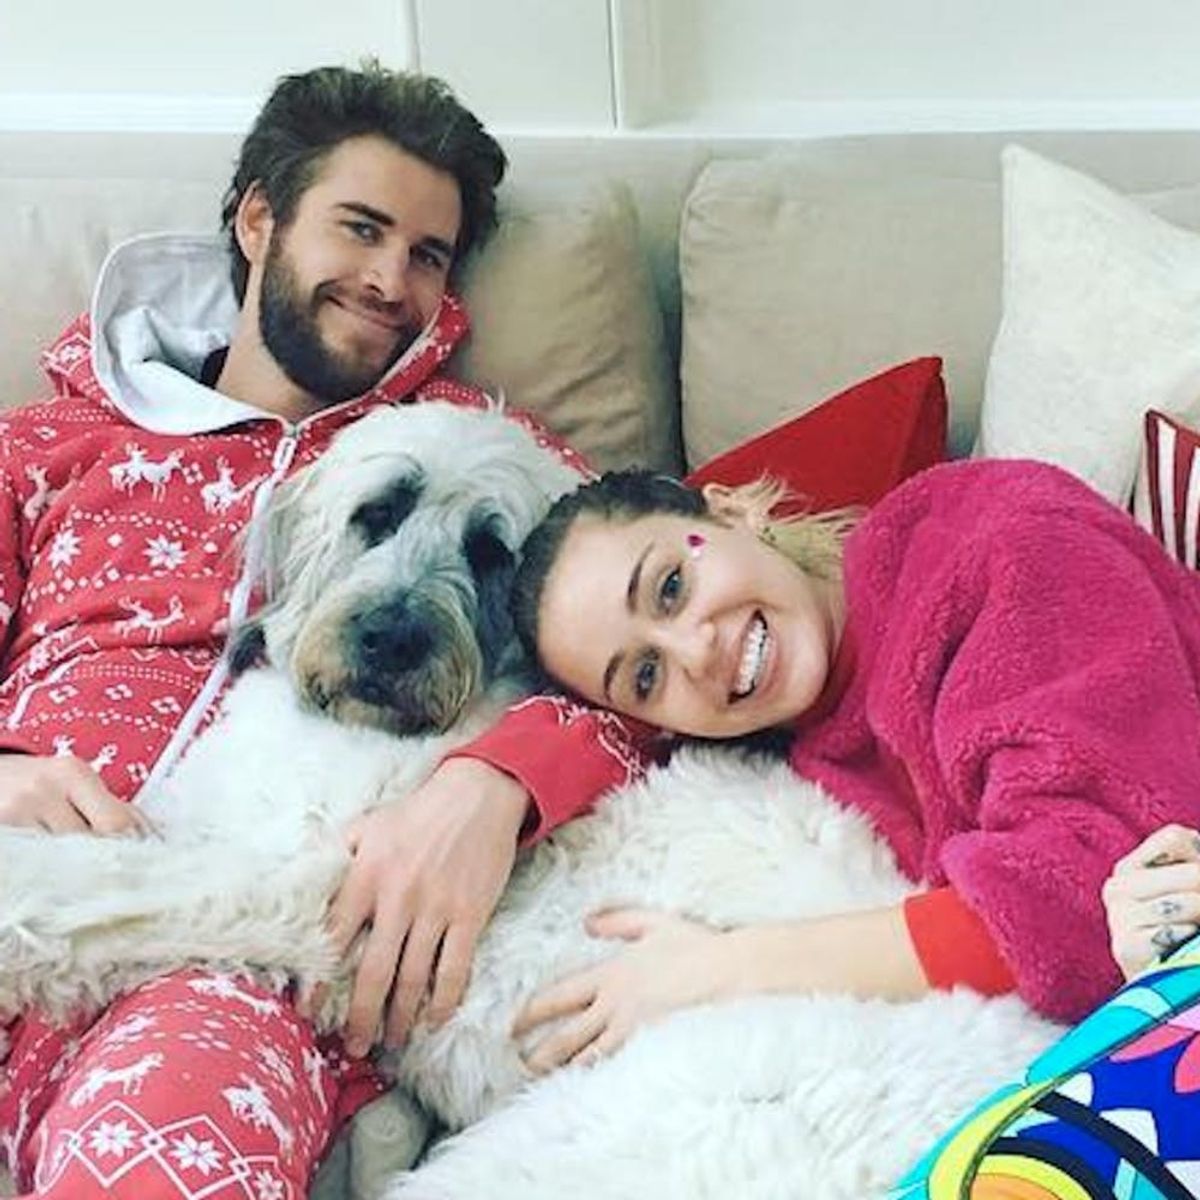 How Miley Cyrus and Liam Hemsworth Became Everyone’s Unexpected Fave Couple